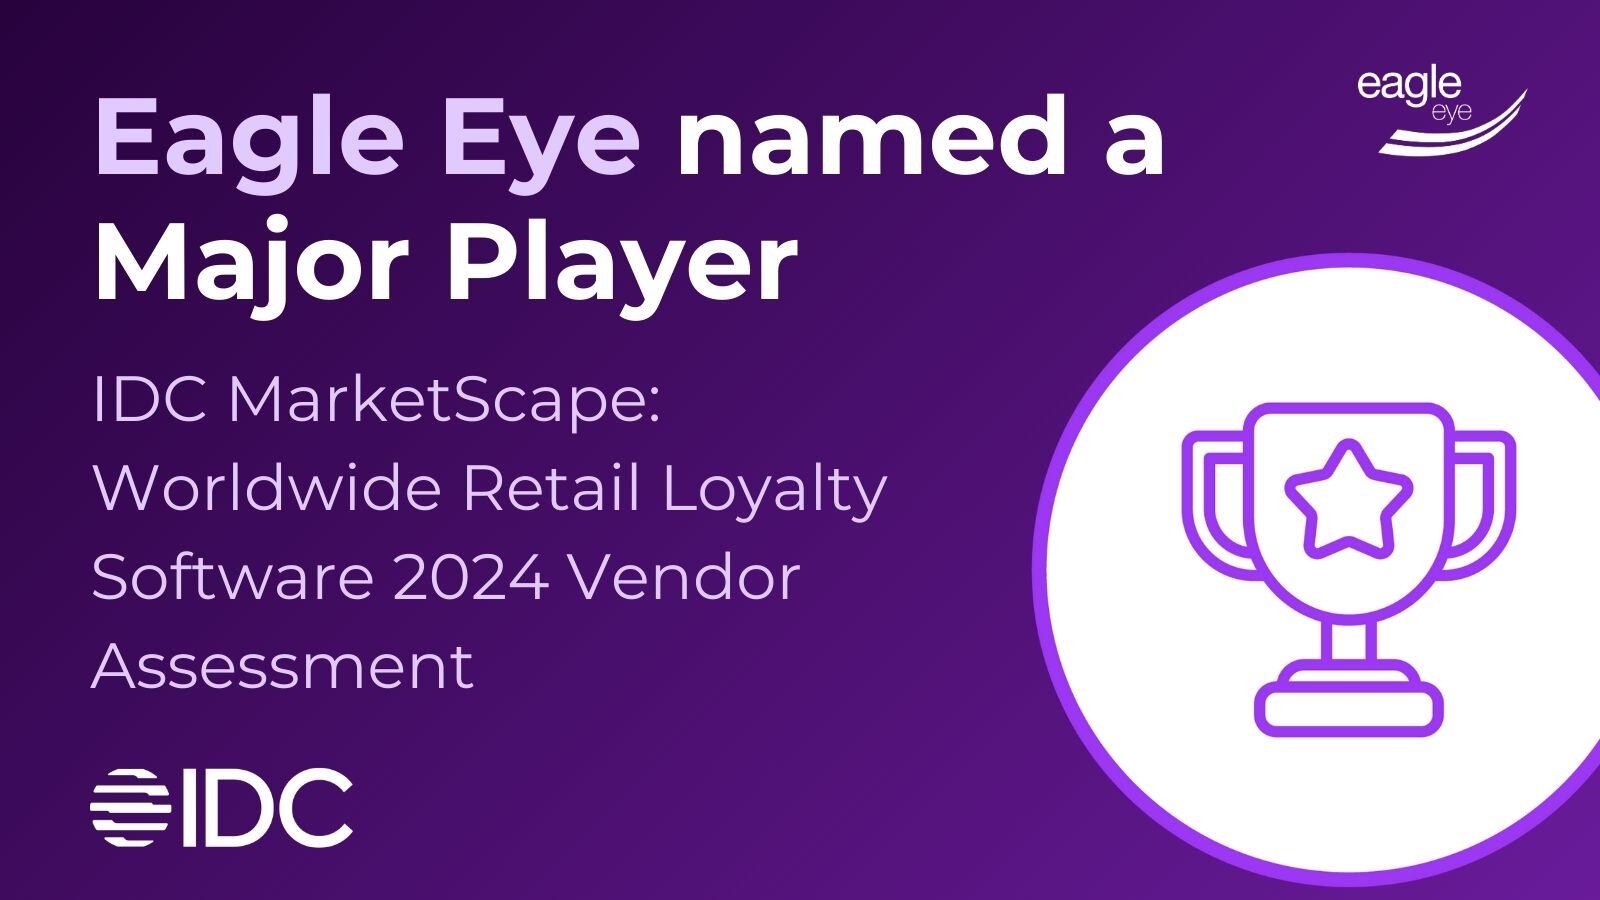 Eagle Eye recognized as a Major Player in IDC MarketScape report